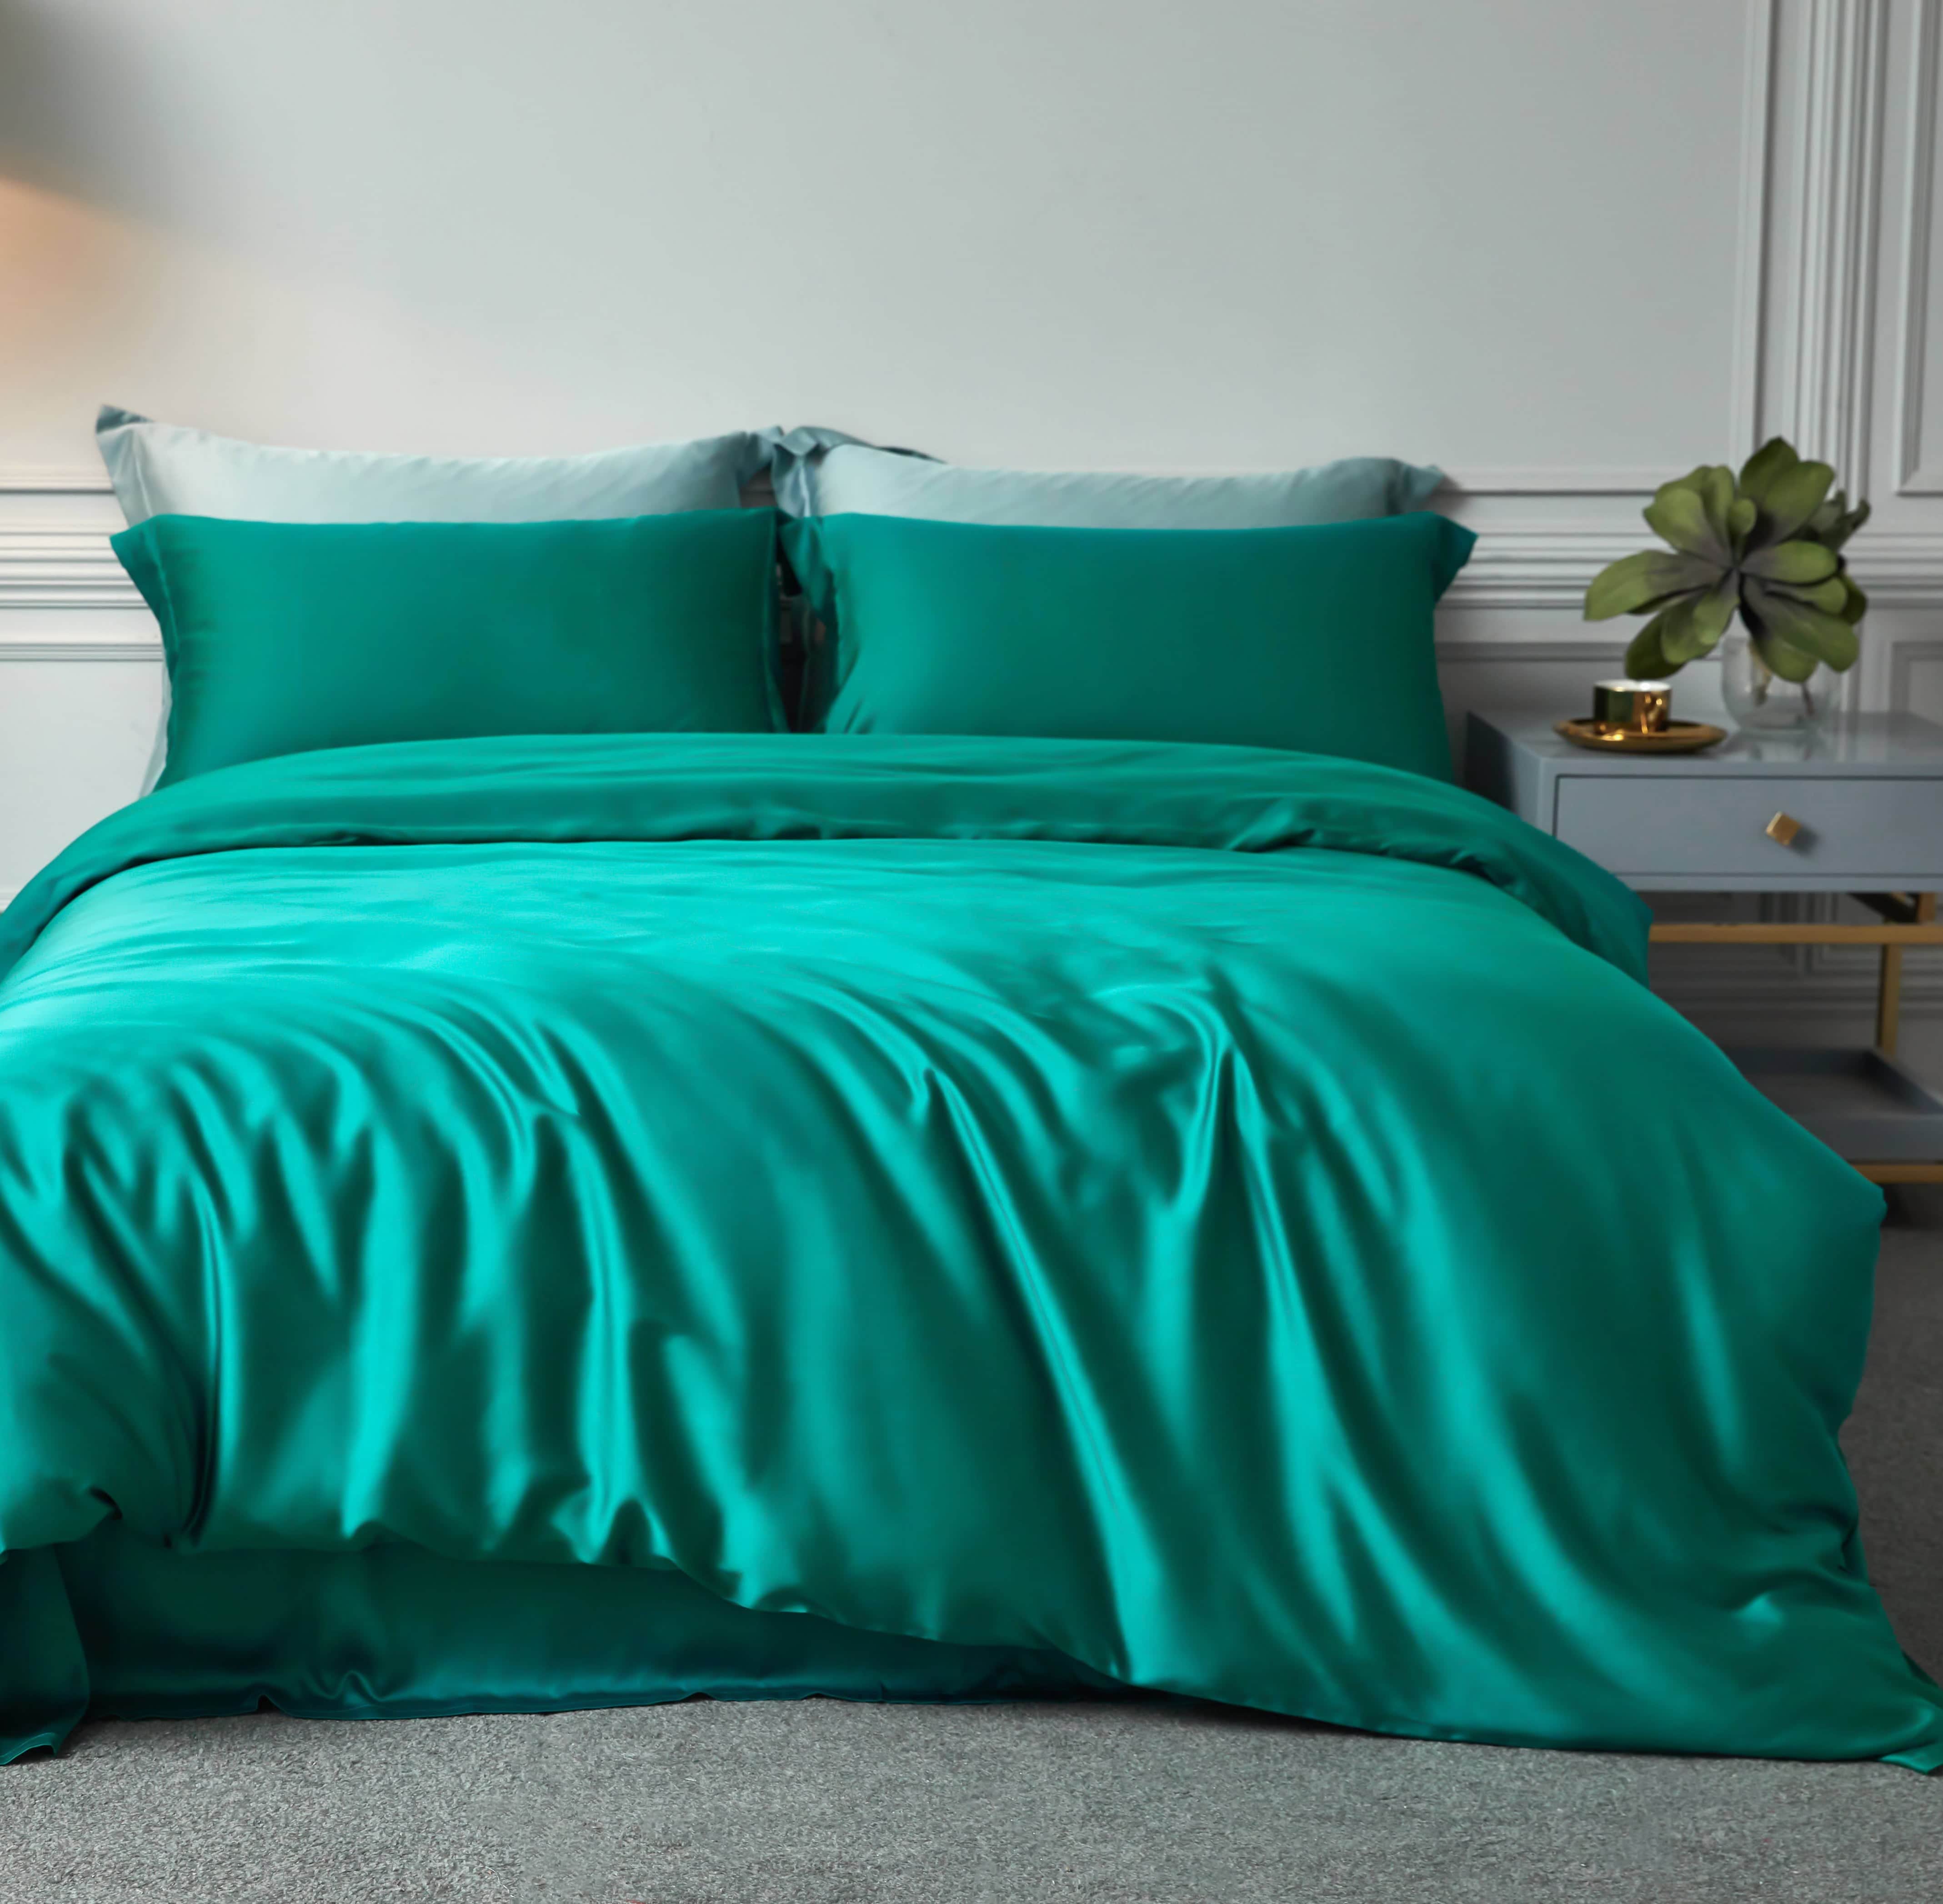 New Arrival Solid Color Tencel Lyocell Fabric Bedding Set 